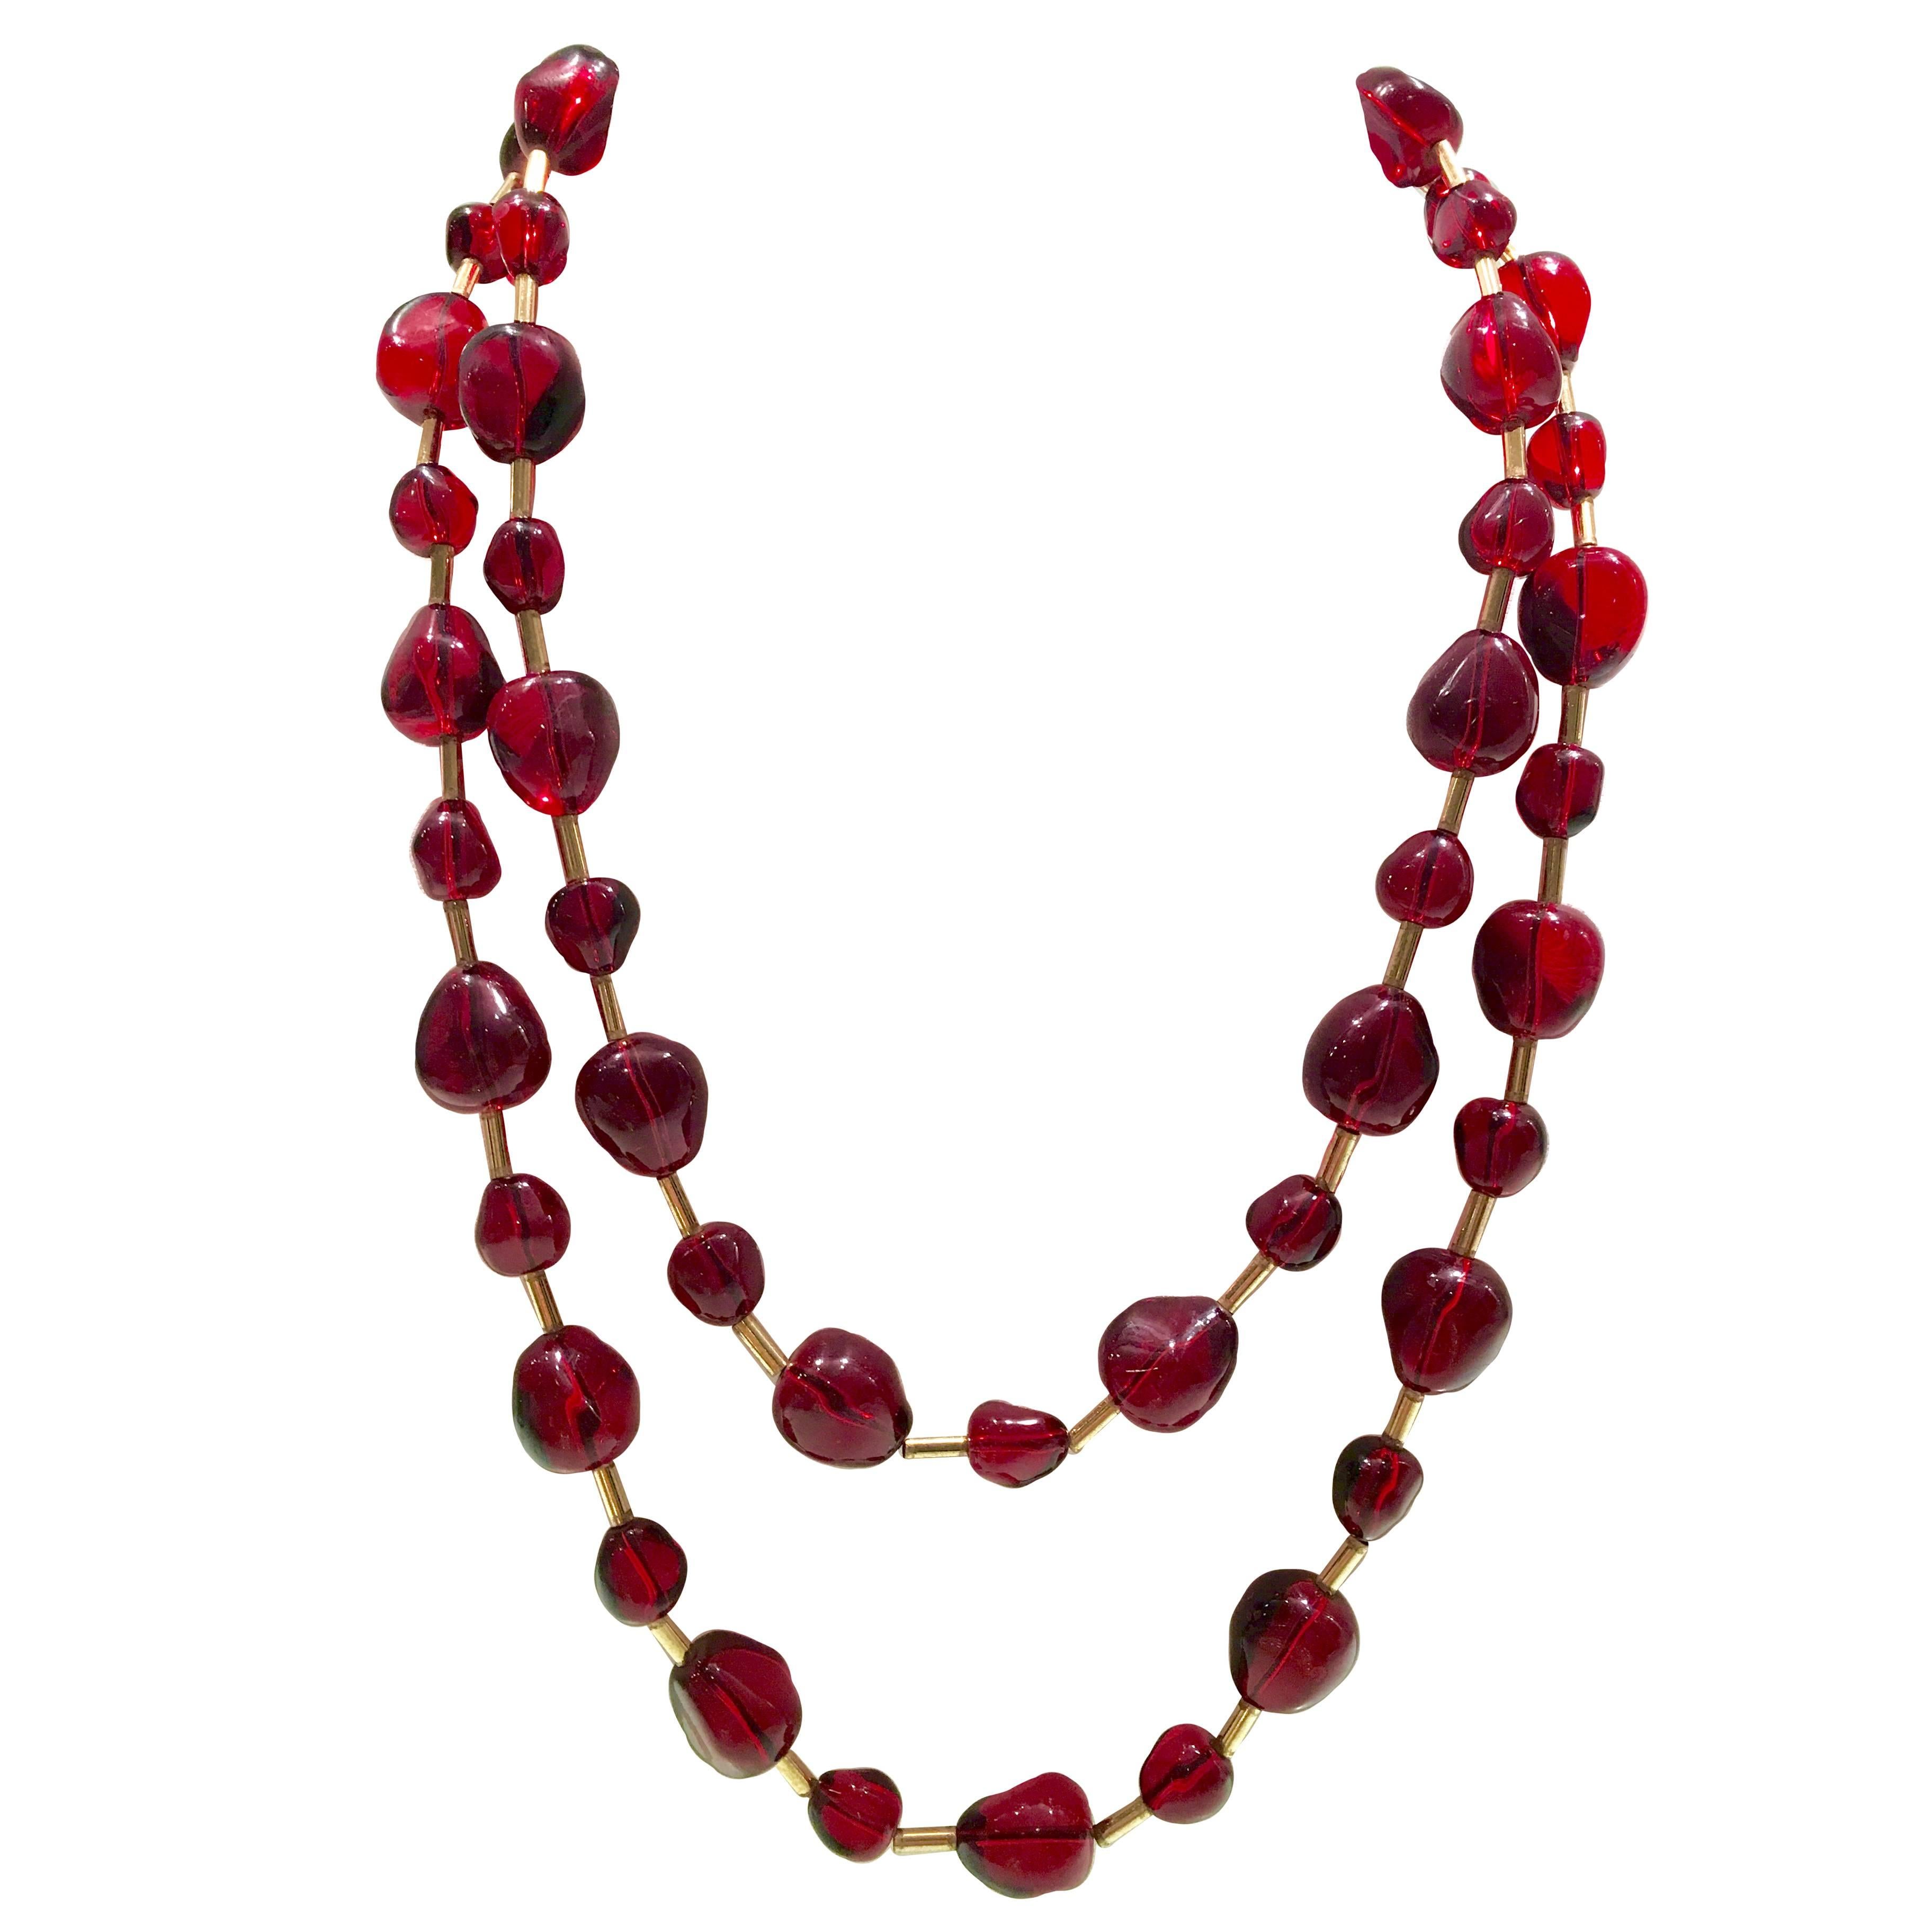 KJL Opera Length Ruby Red Bead and Gold Plate Necklace, Signed